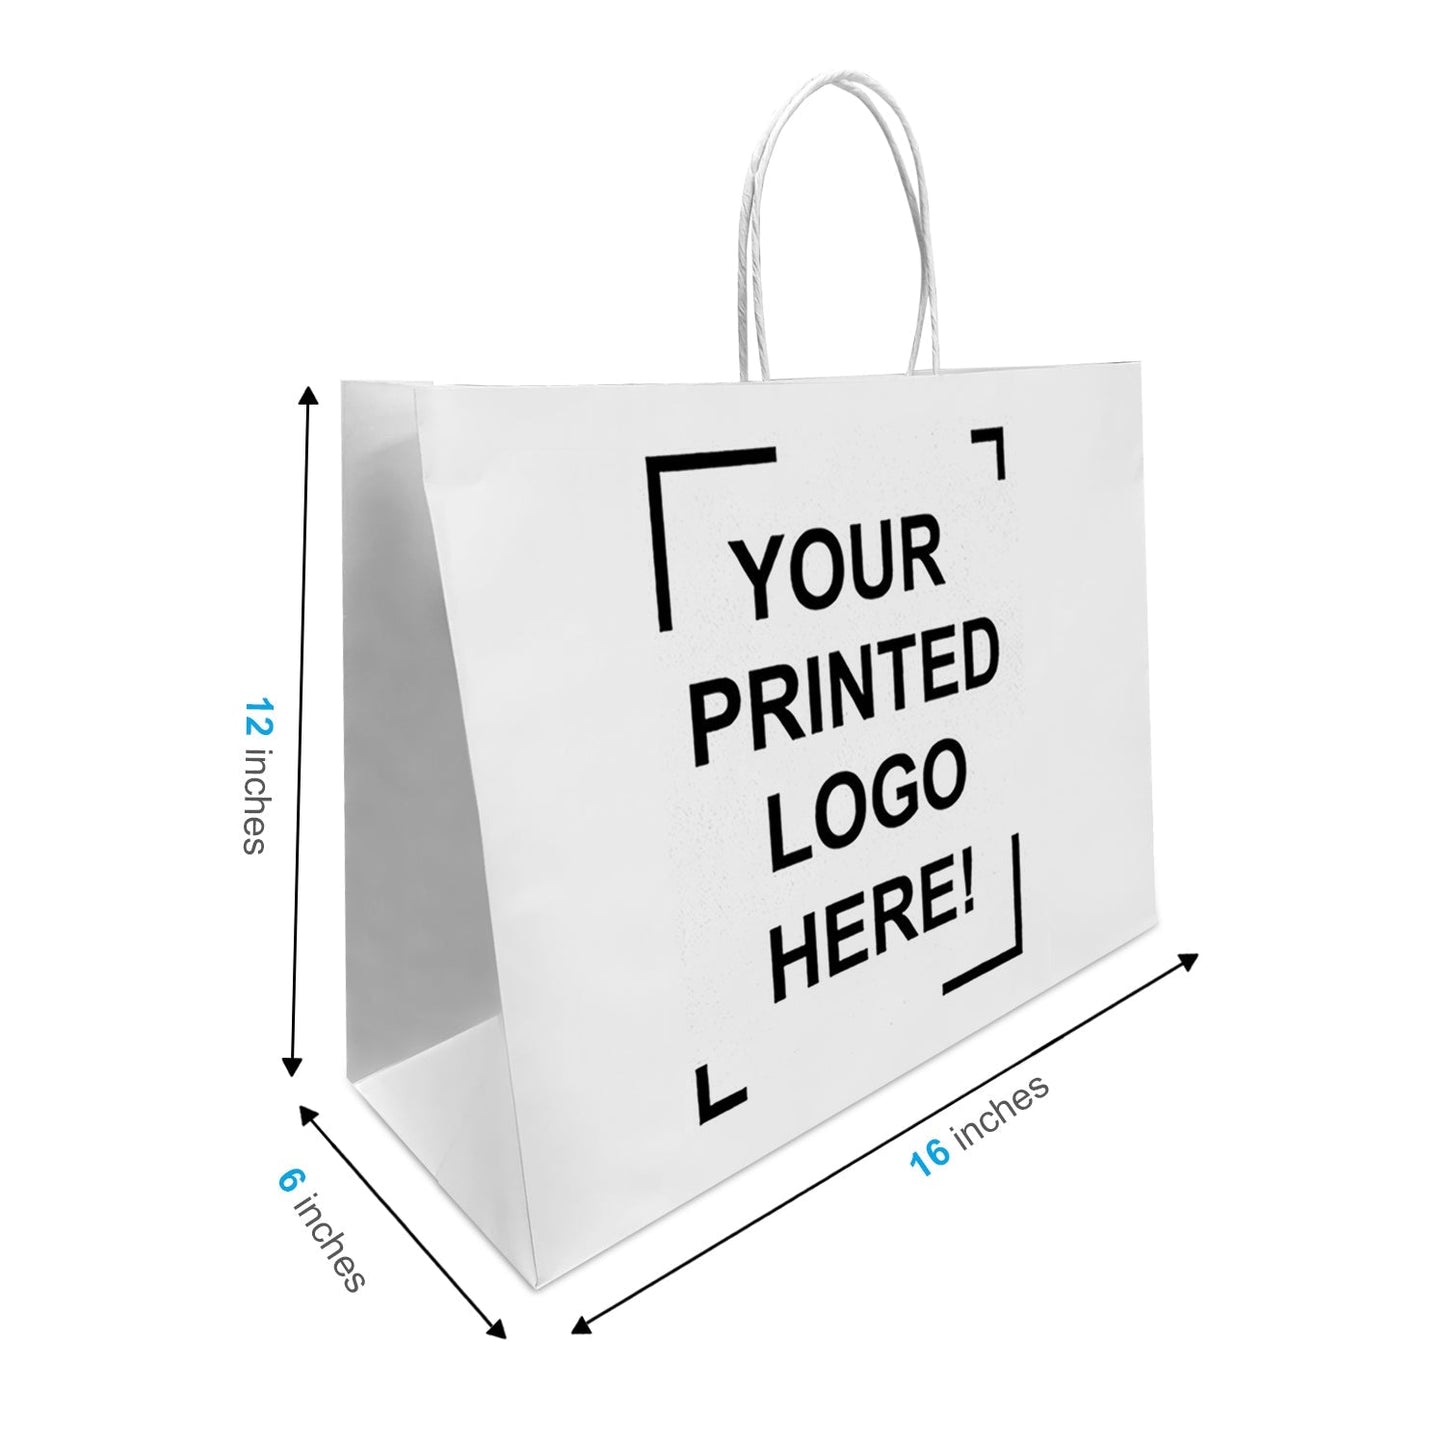 250pcs 2 Sides Custom Print Vogue 16x6x12 inches White Paper Bags with Handles; $1.07/pc, Two Full Color Printed in North America